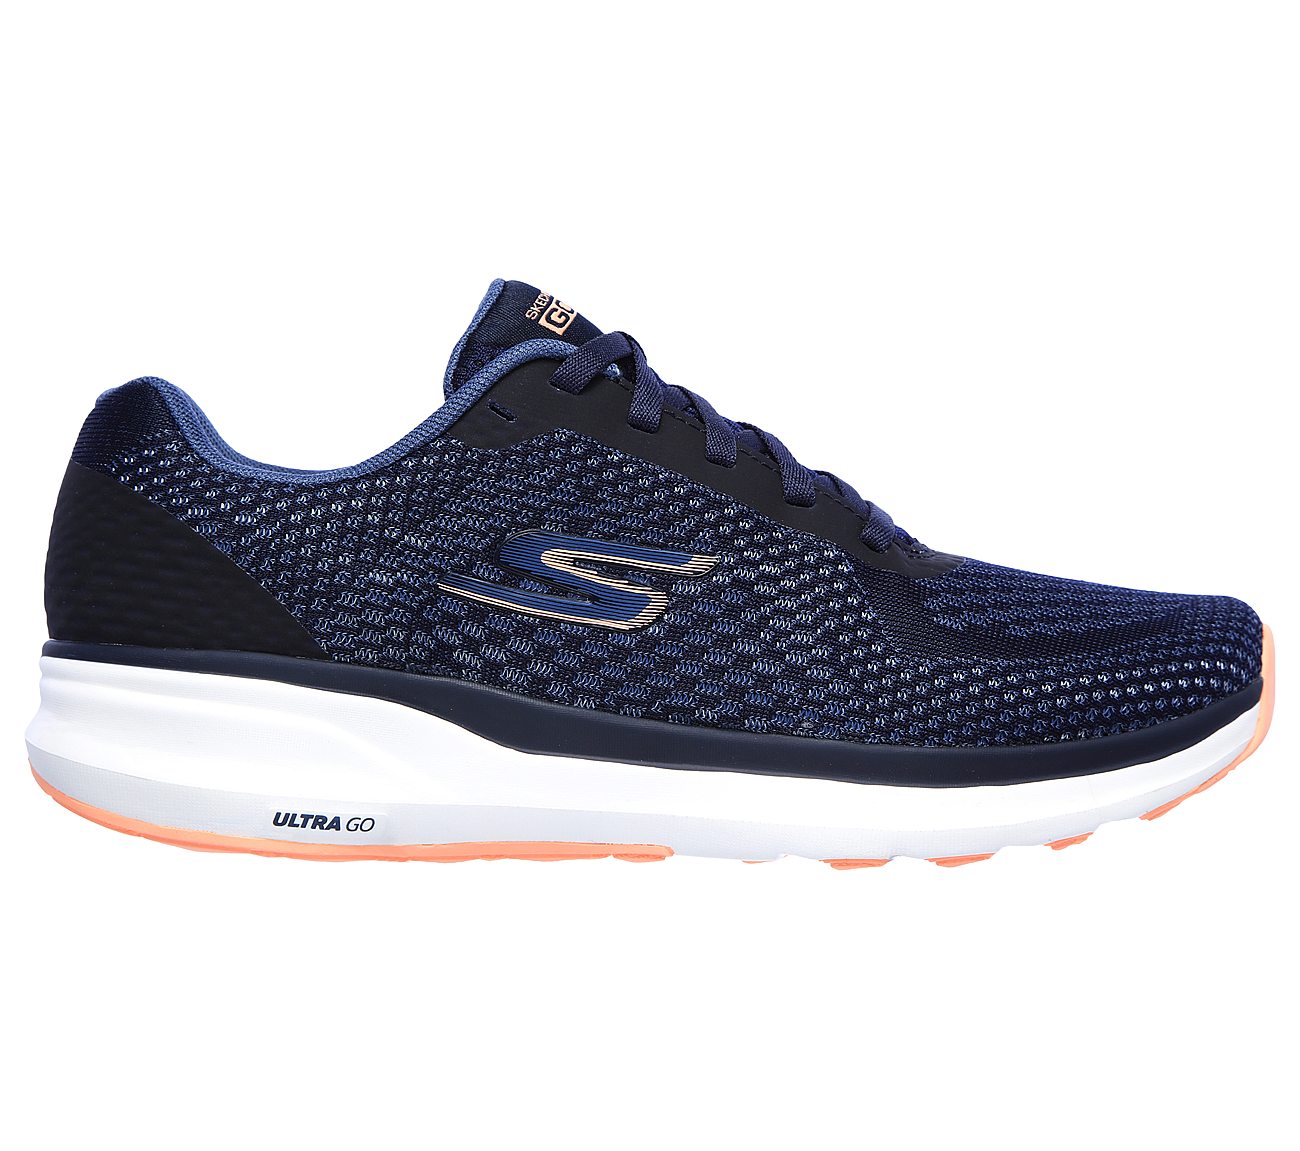 PURE, NAVY/CORAL Footwear Right View